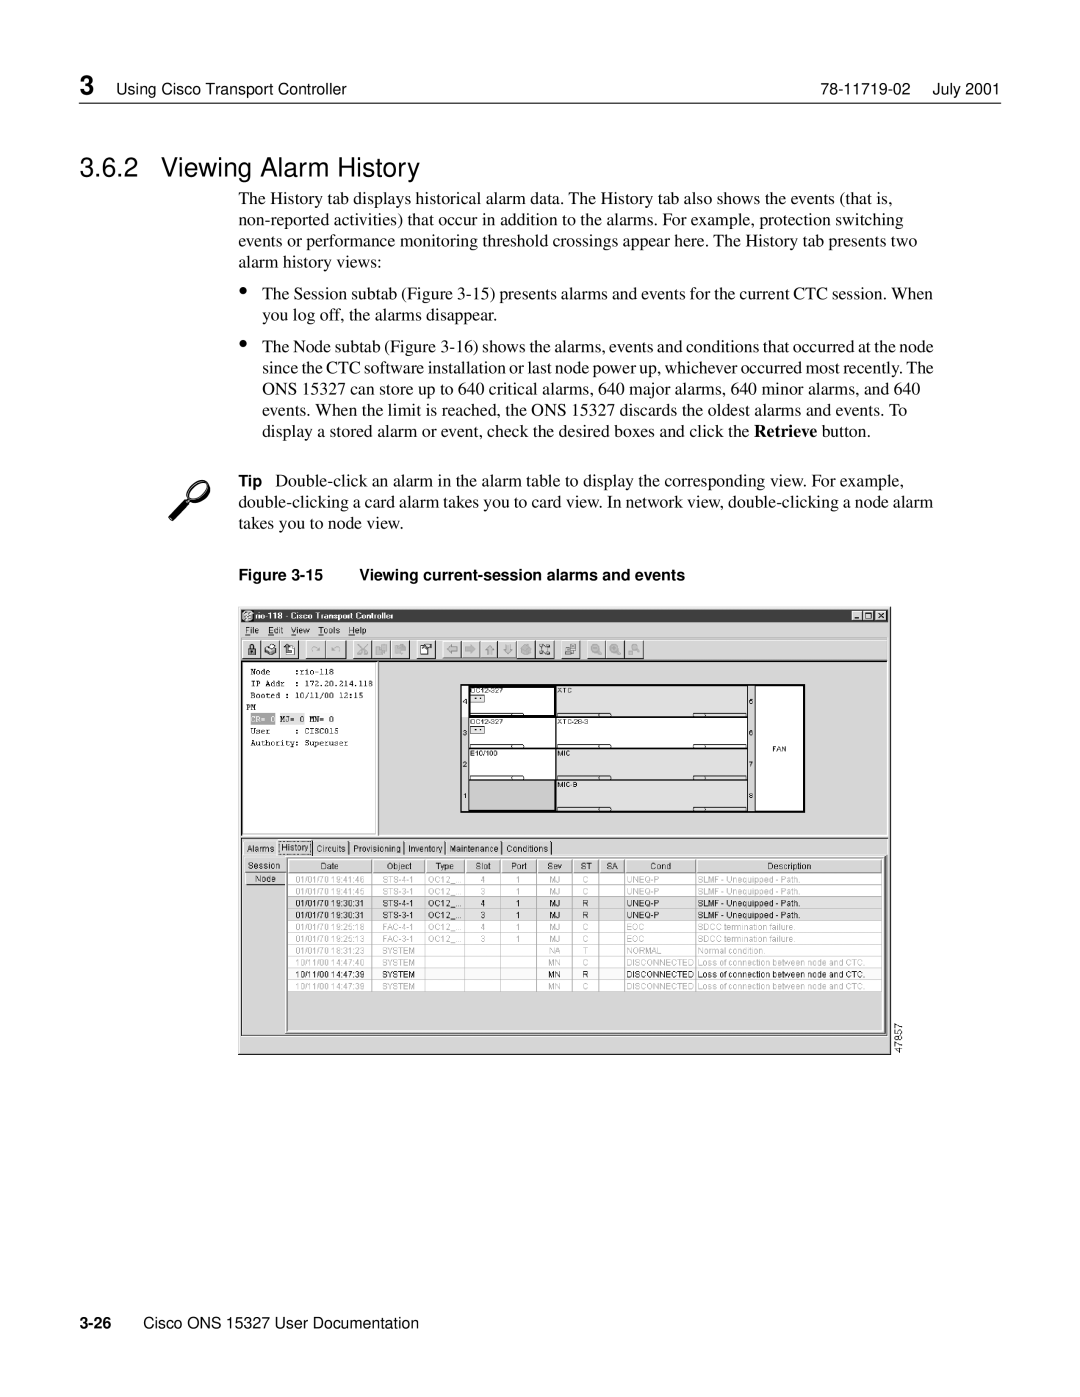 Cisco Systems ONS 15327 manual Viewing Alarm History, 15 Viewing current-session alarms and events 